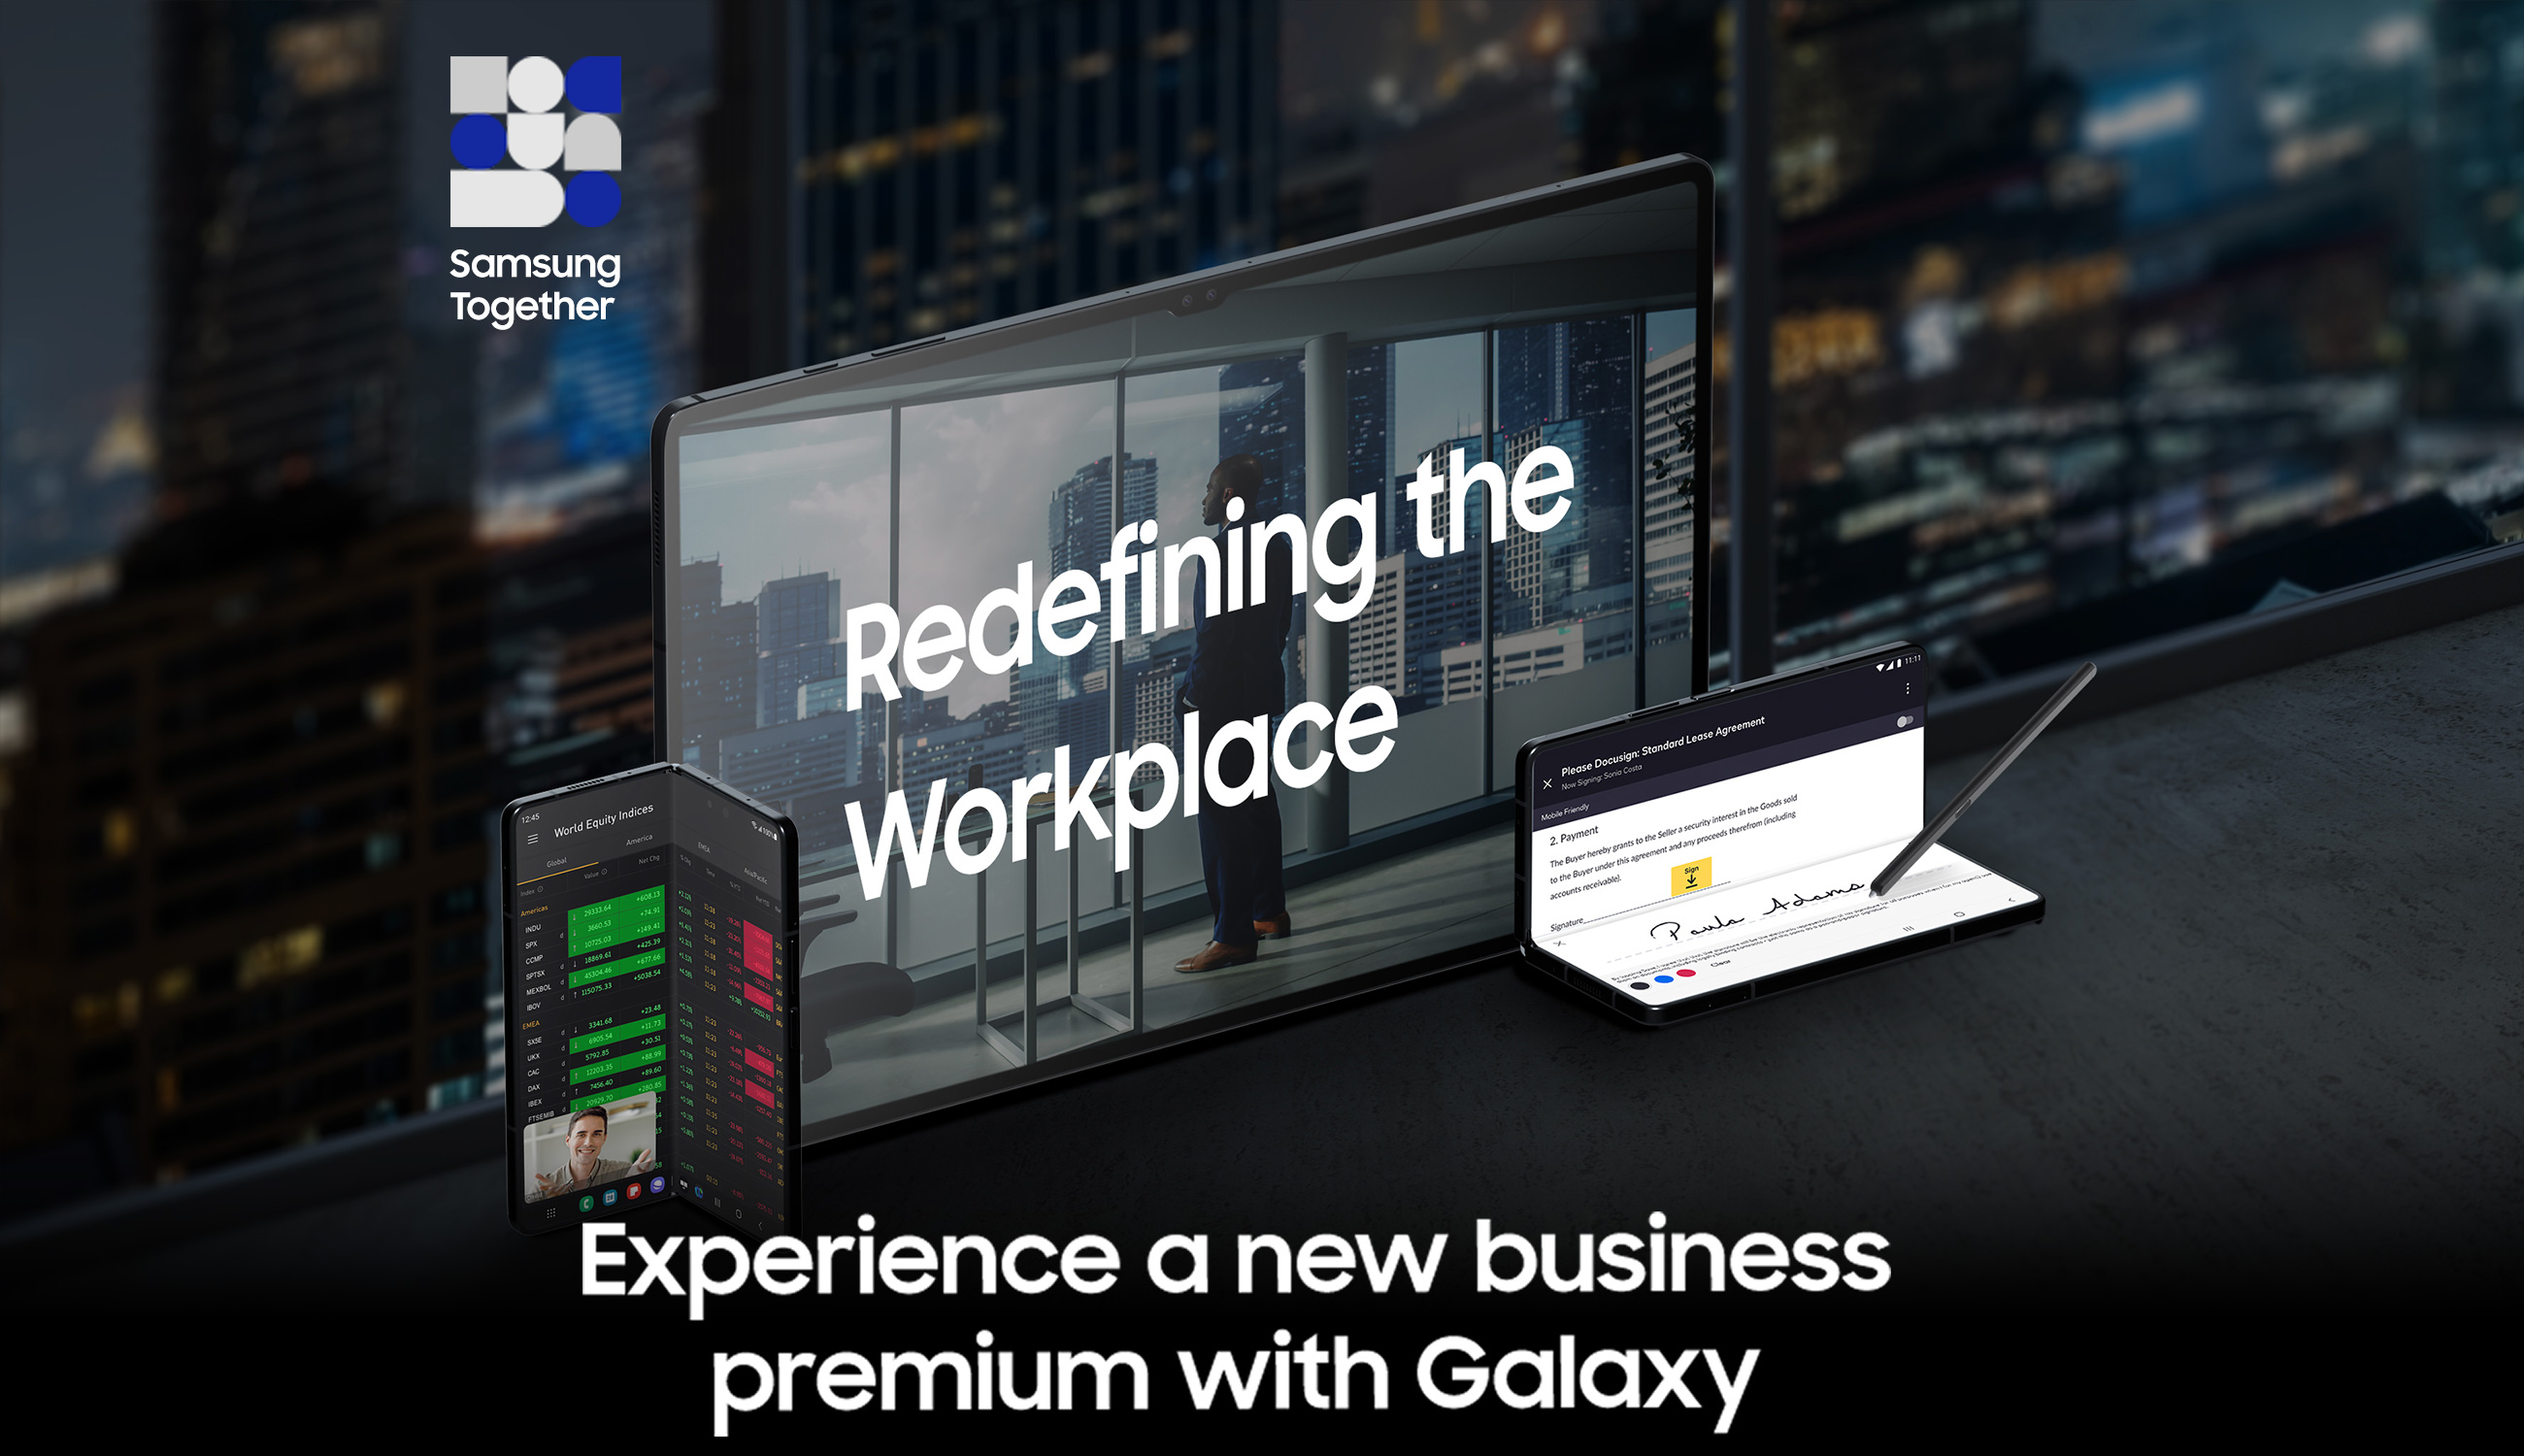 Samsung Together - Galaxy Redefining the Workplace